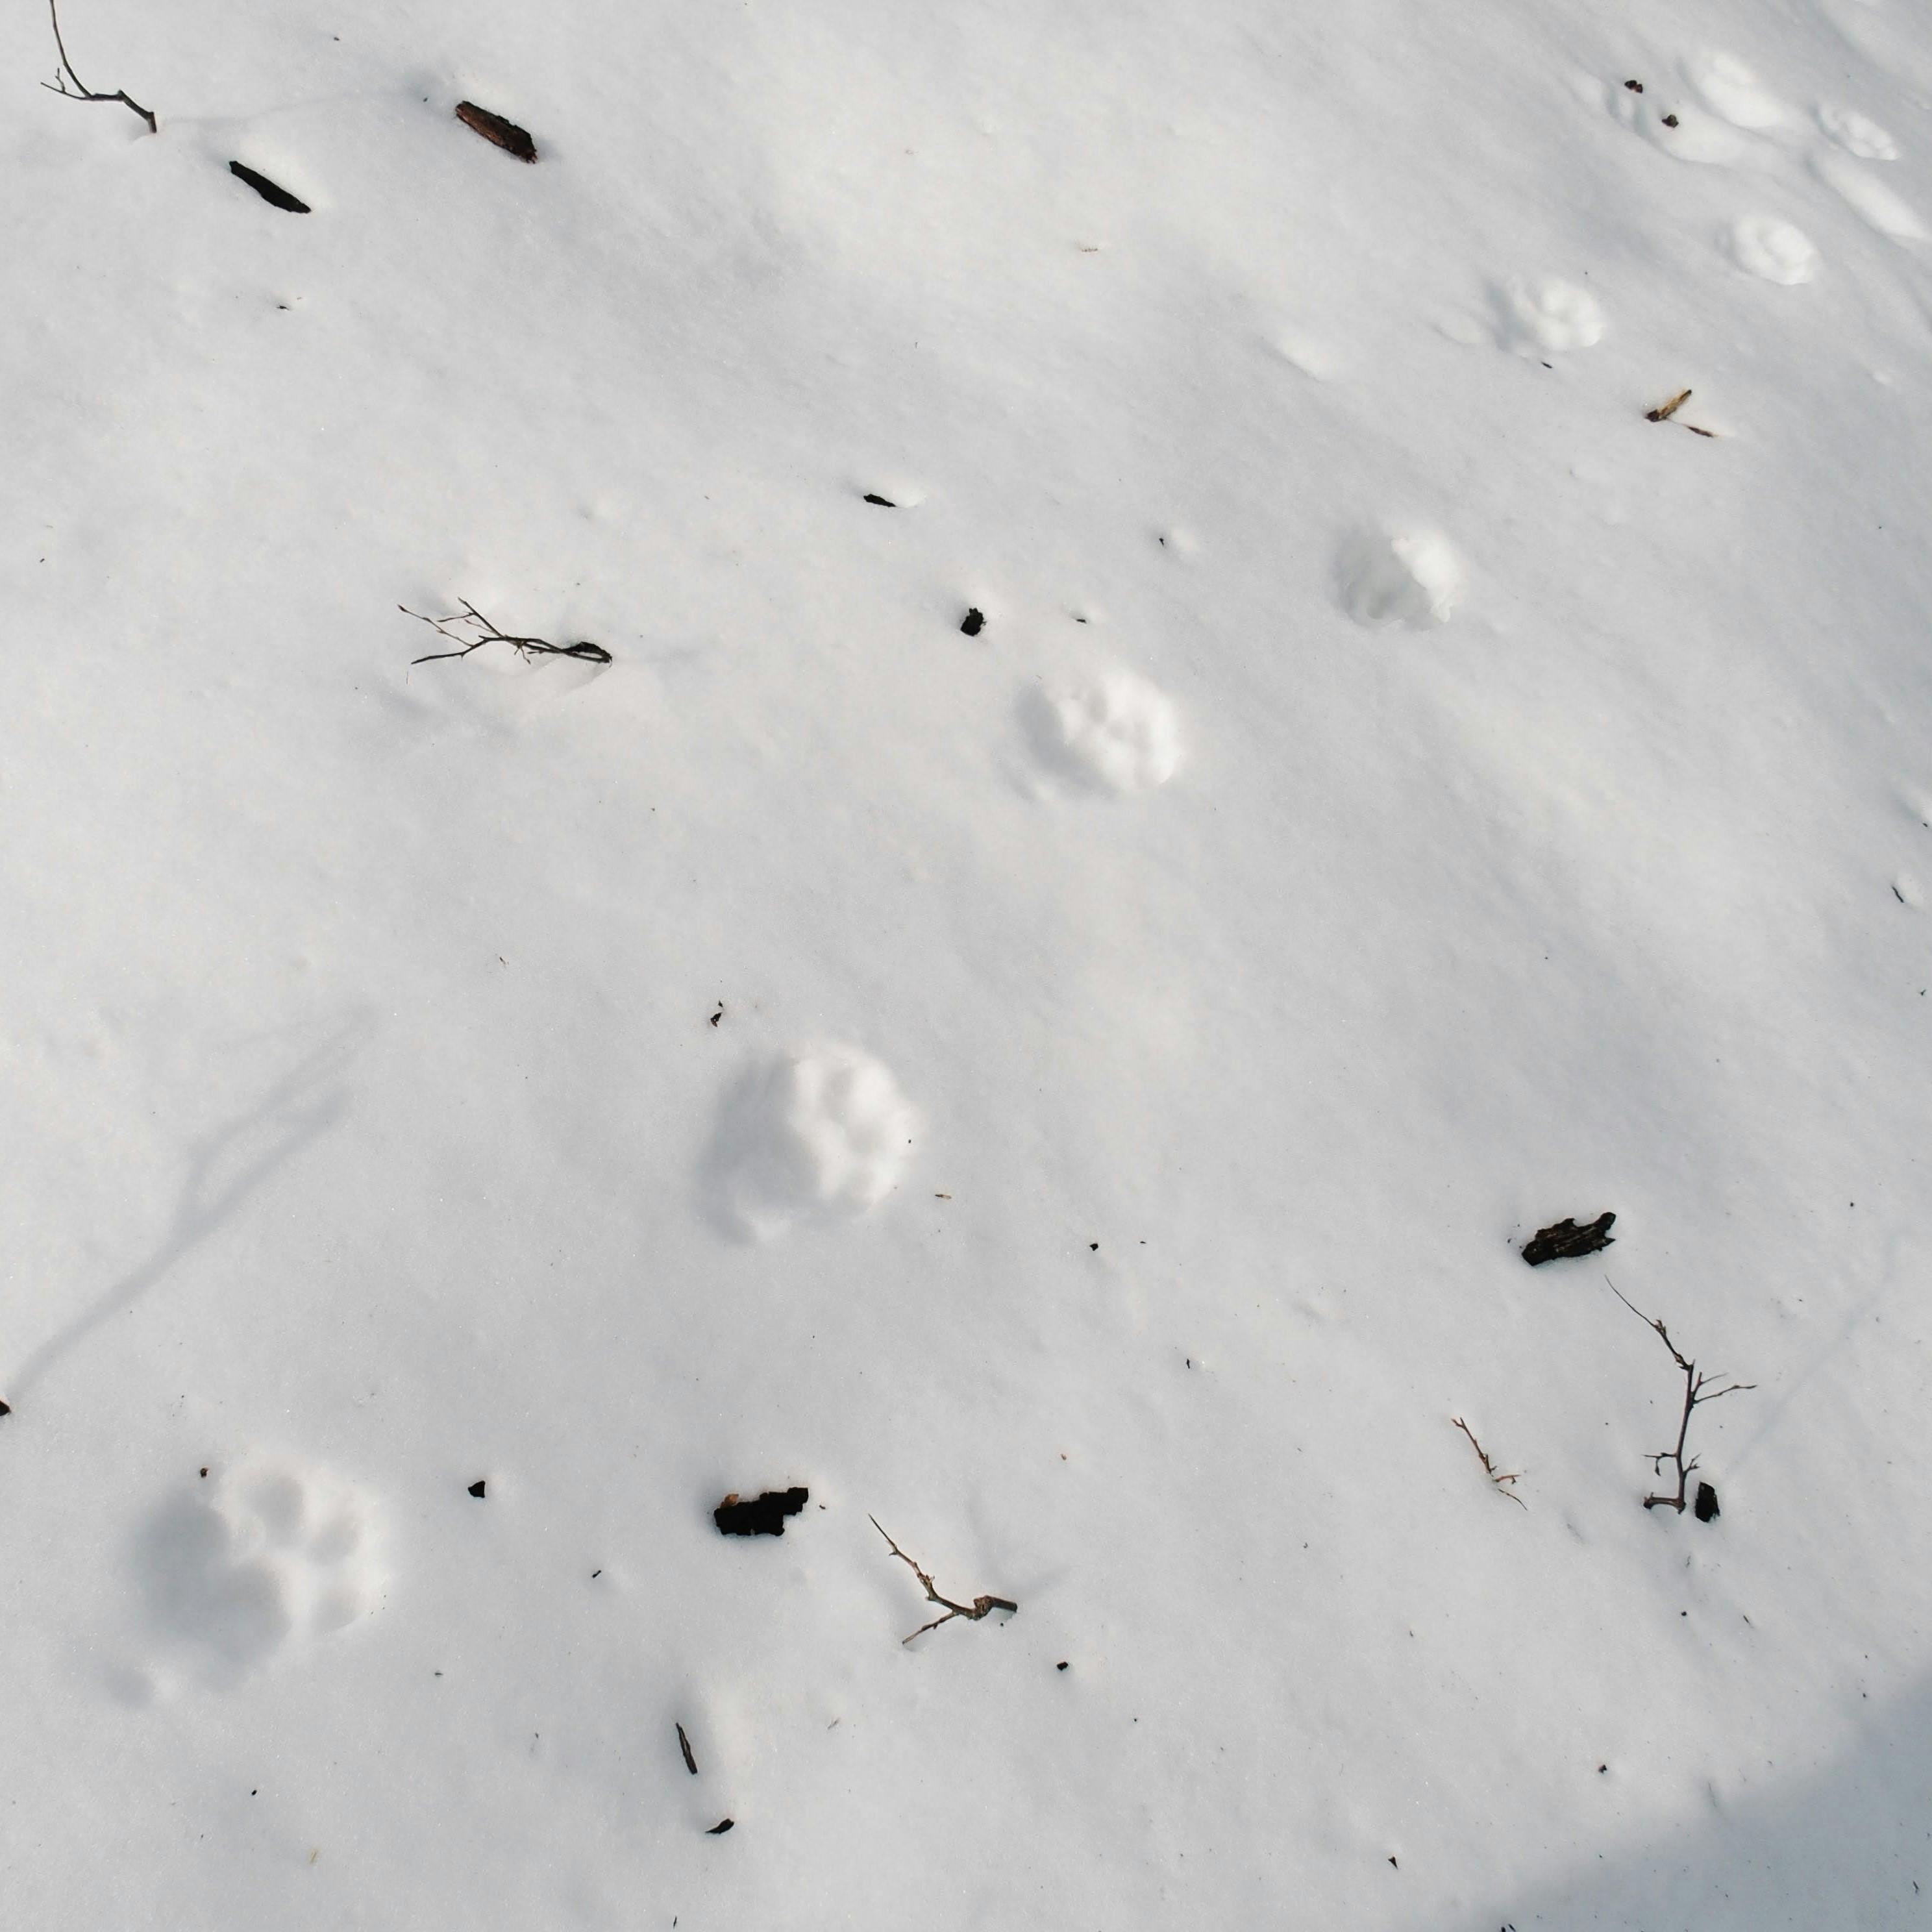 Eurasian lynx tracks clearly defined in the deep snow